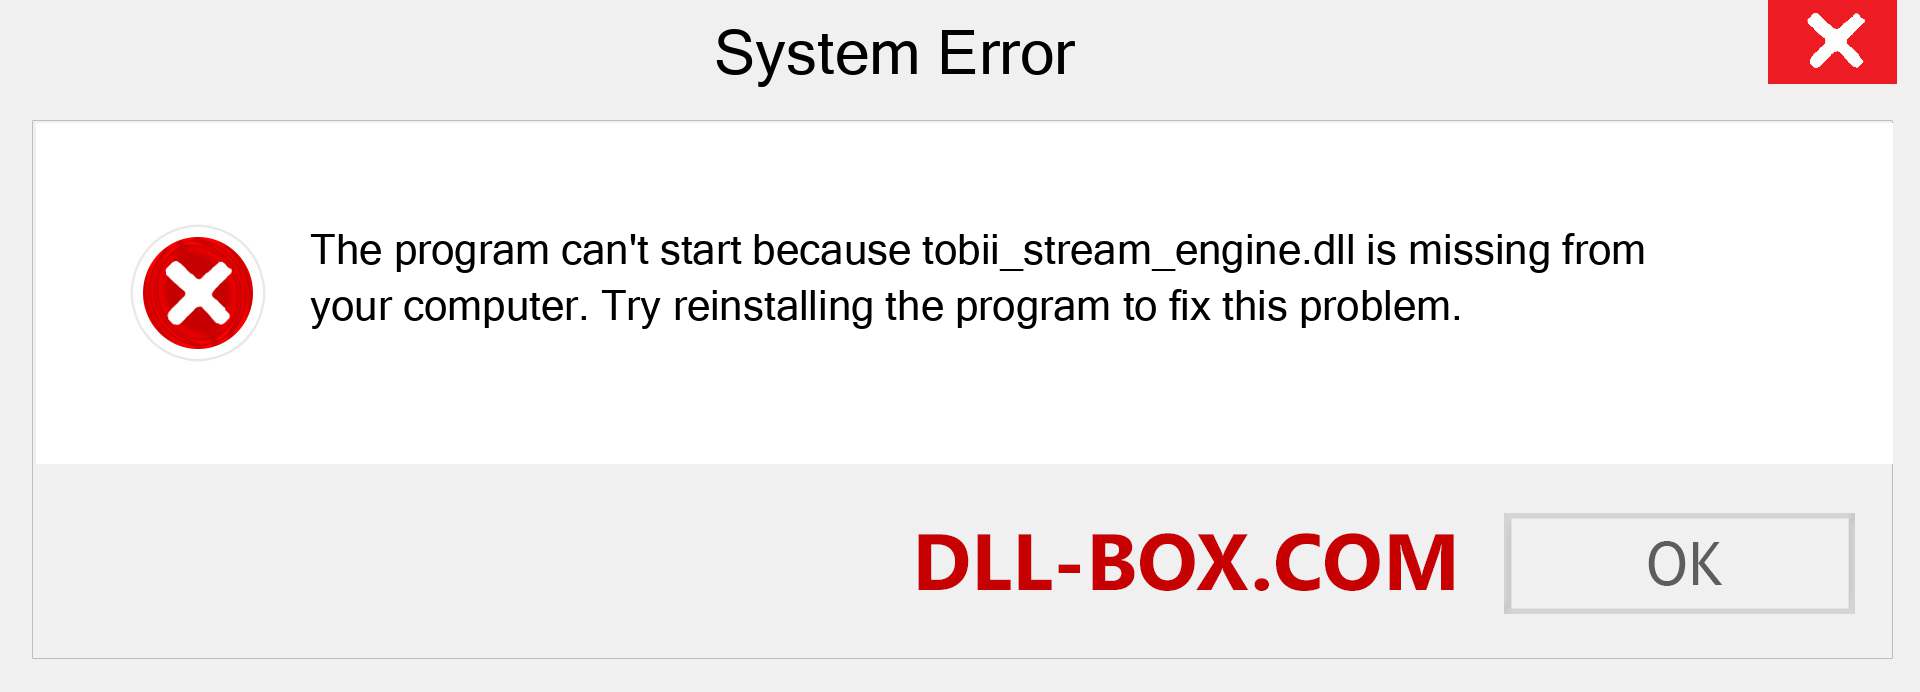  tobii_stream_engine.dll file is missing?. Download for Windows 7, 8, 10 - Fix  tobii_stream_engine dll Missing Error on Windows, photos, images